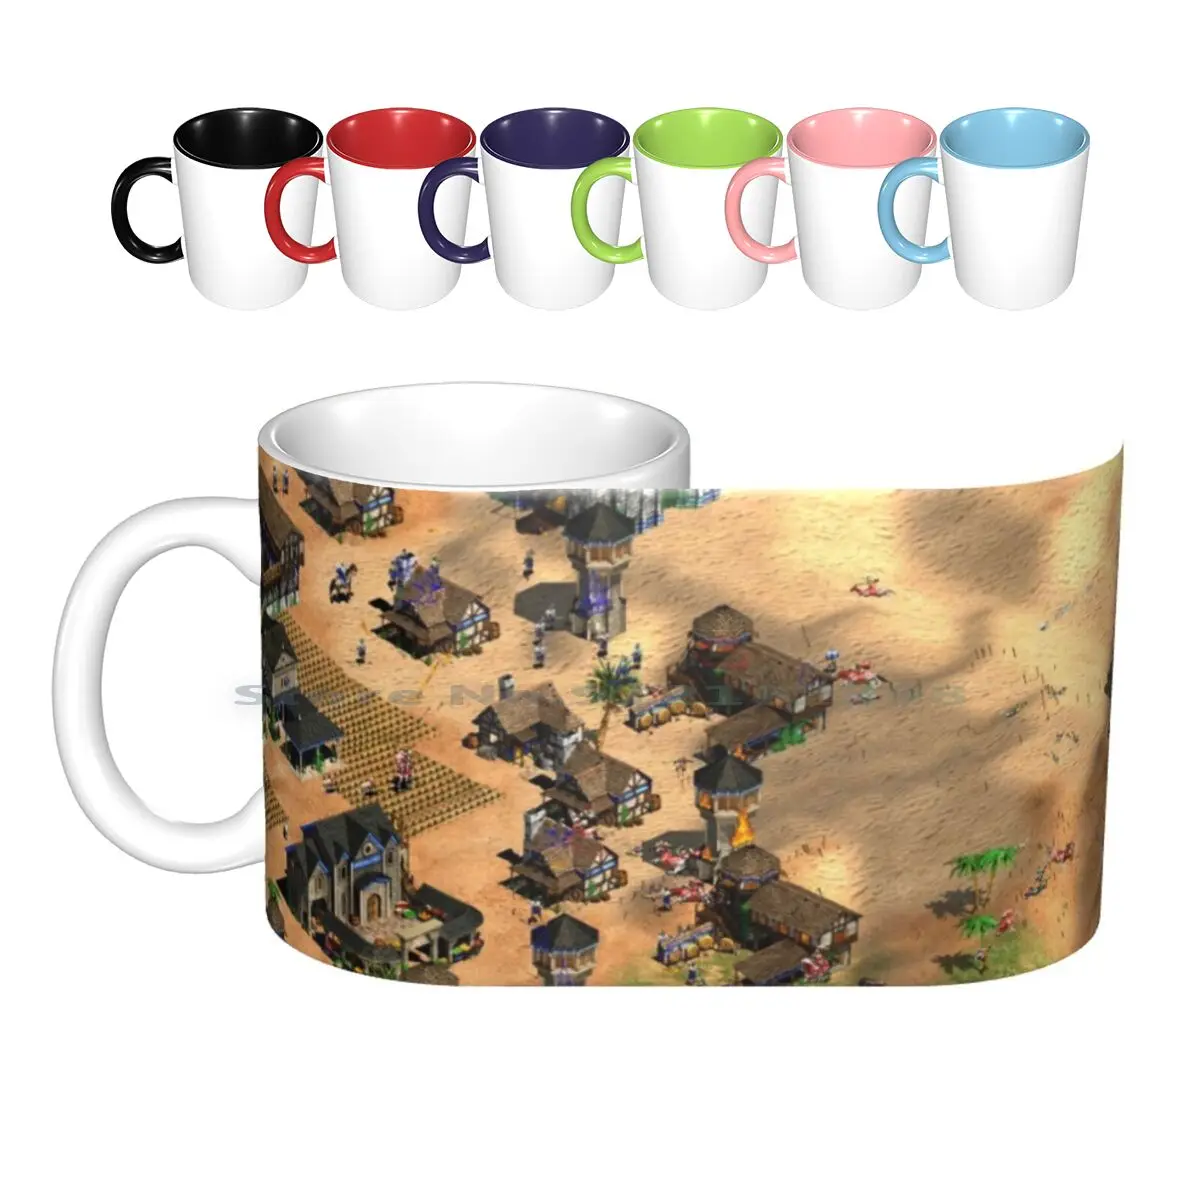 

Age Of Empires Battle Cup Ceramic Mugs Coffee Cups Milk Tea Mug Age Of Empires Gaming Christmas Nerd Vintage Hipster Computer